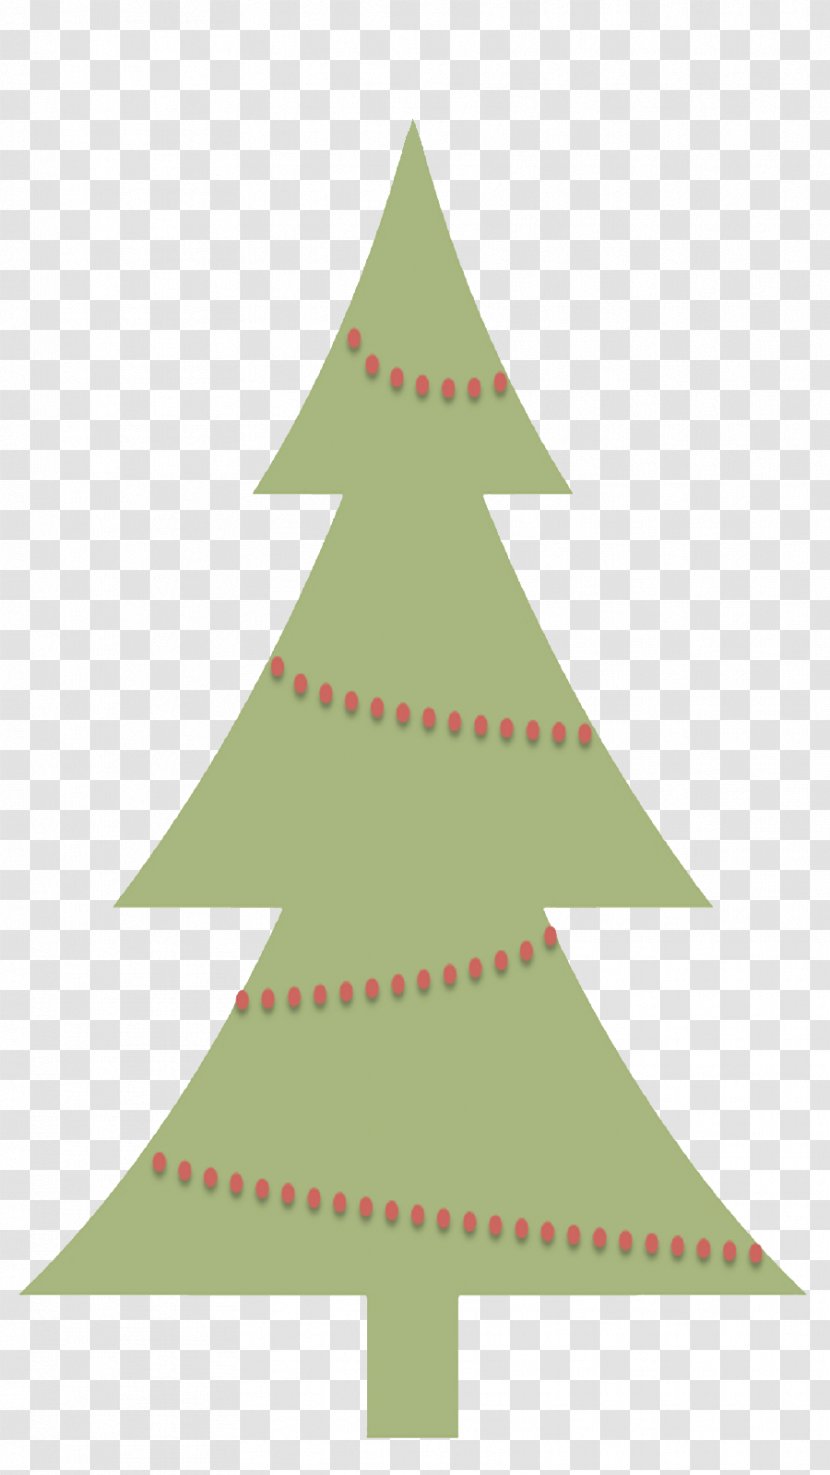 Santa Claus Christmas Tree Clip Art Day Rudolph - The Rednosed Reindeer Transparent PNG